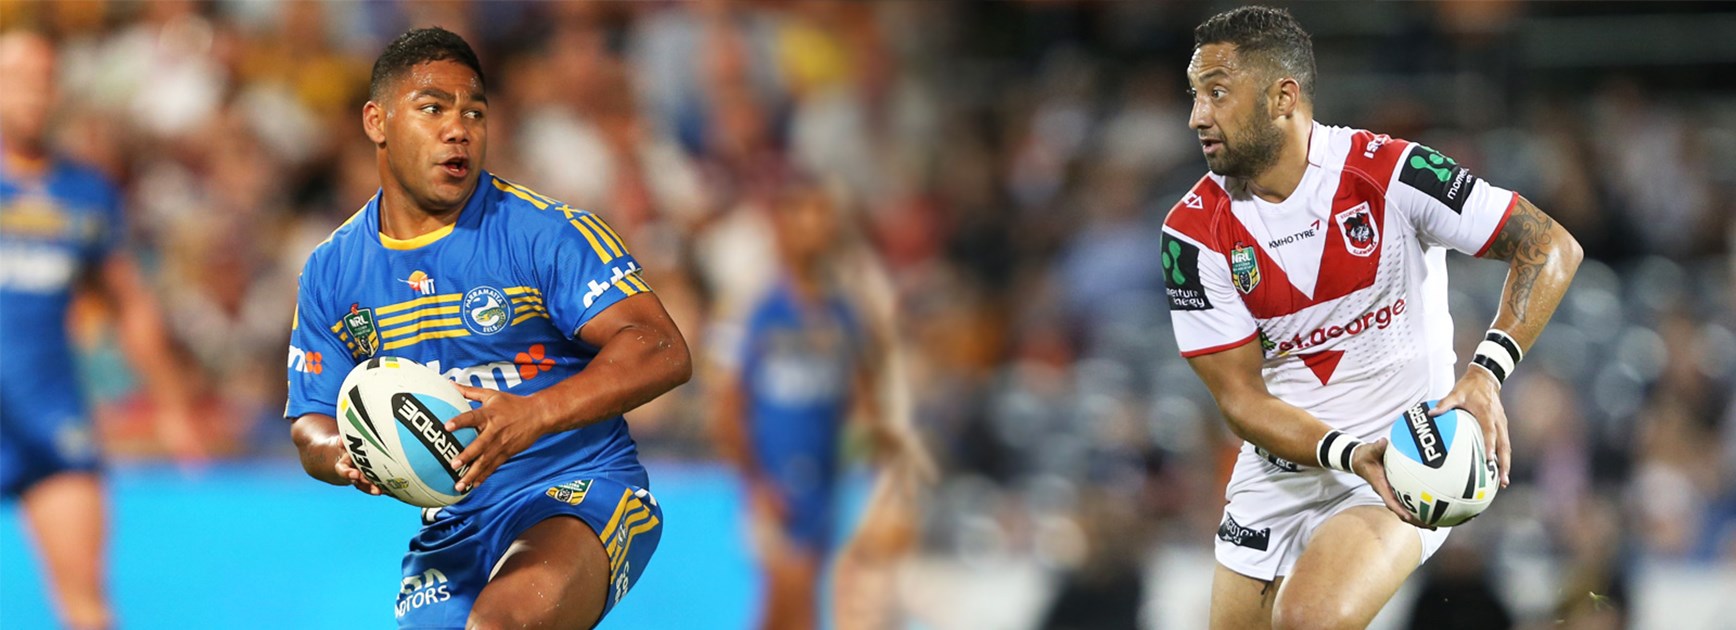 Both Chris Sandow and Benji Marshall boast natural flair, but which halfback will get the job done on Saturday night?